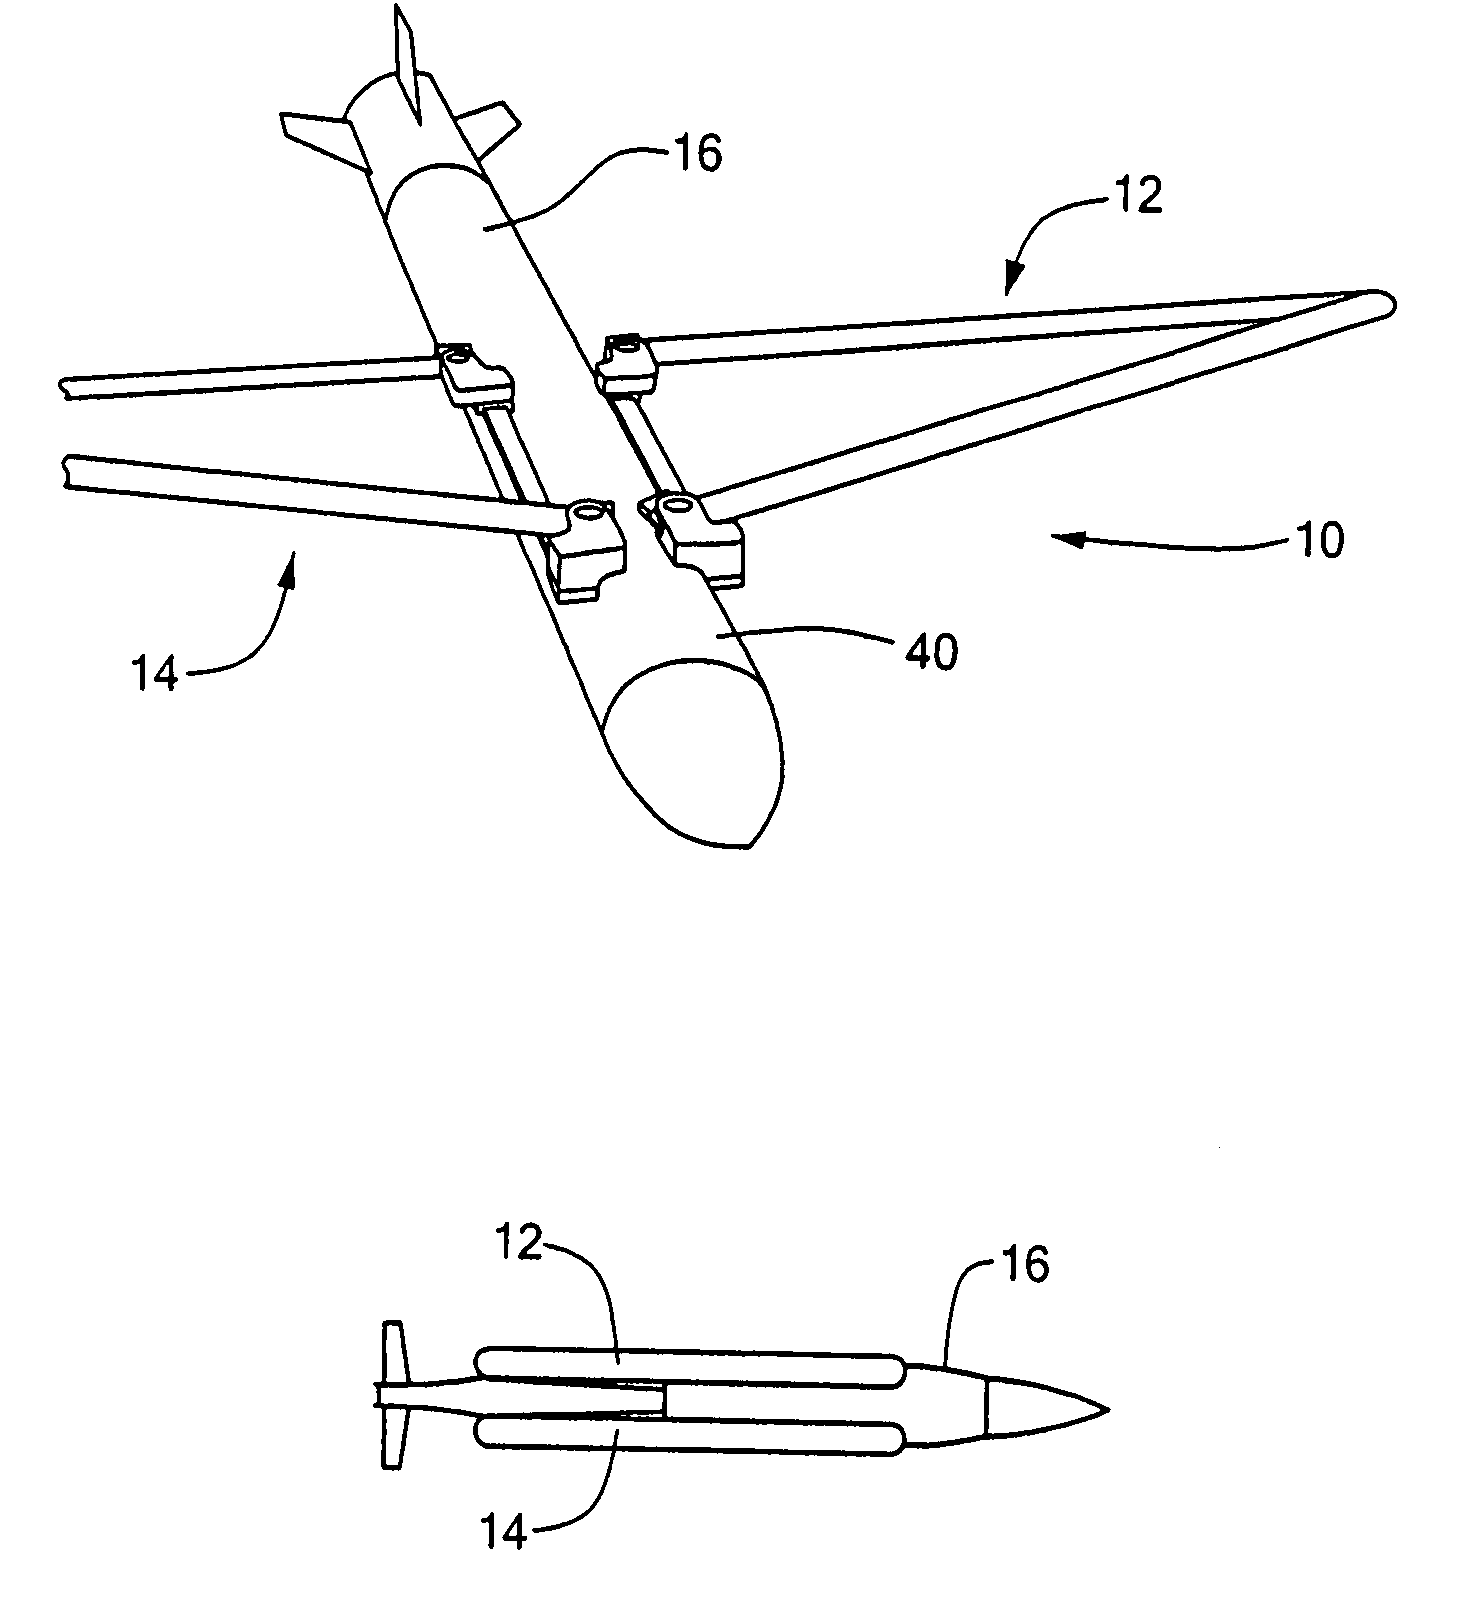 Extendable joined wing system for a fluid-born body